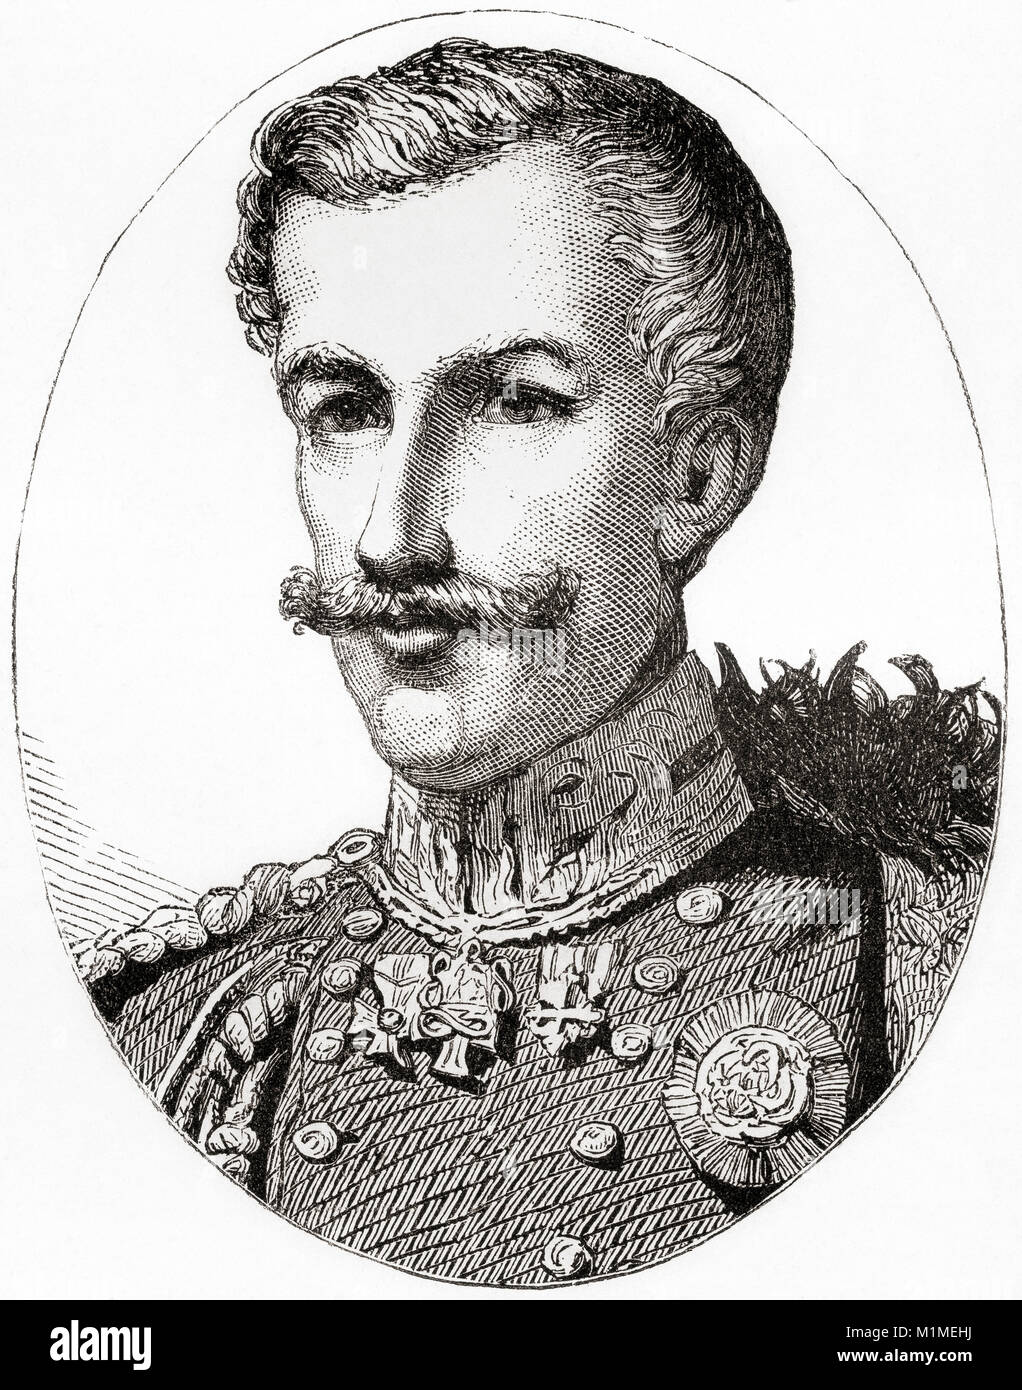 Charles Albert, 1798 – 1849.  King of Sardinia. From Ward and Lock's Illustrated History of the World, published c.1882. Stock Photo